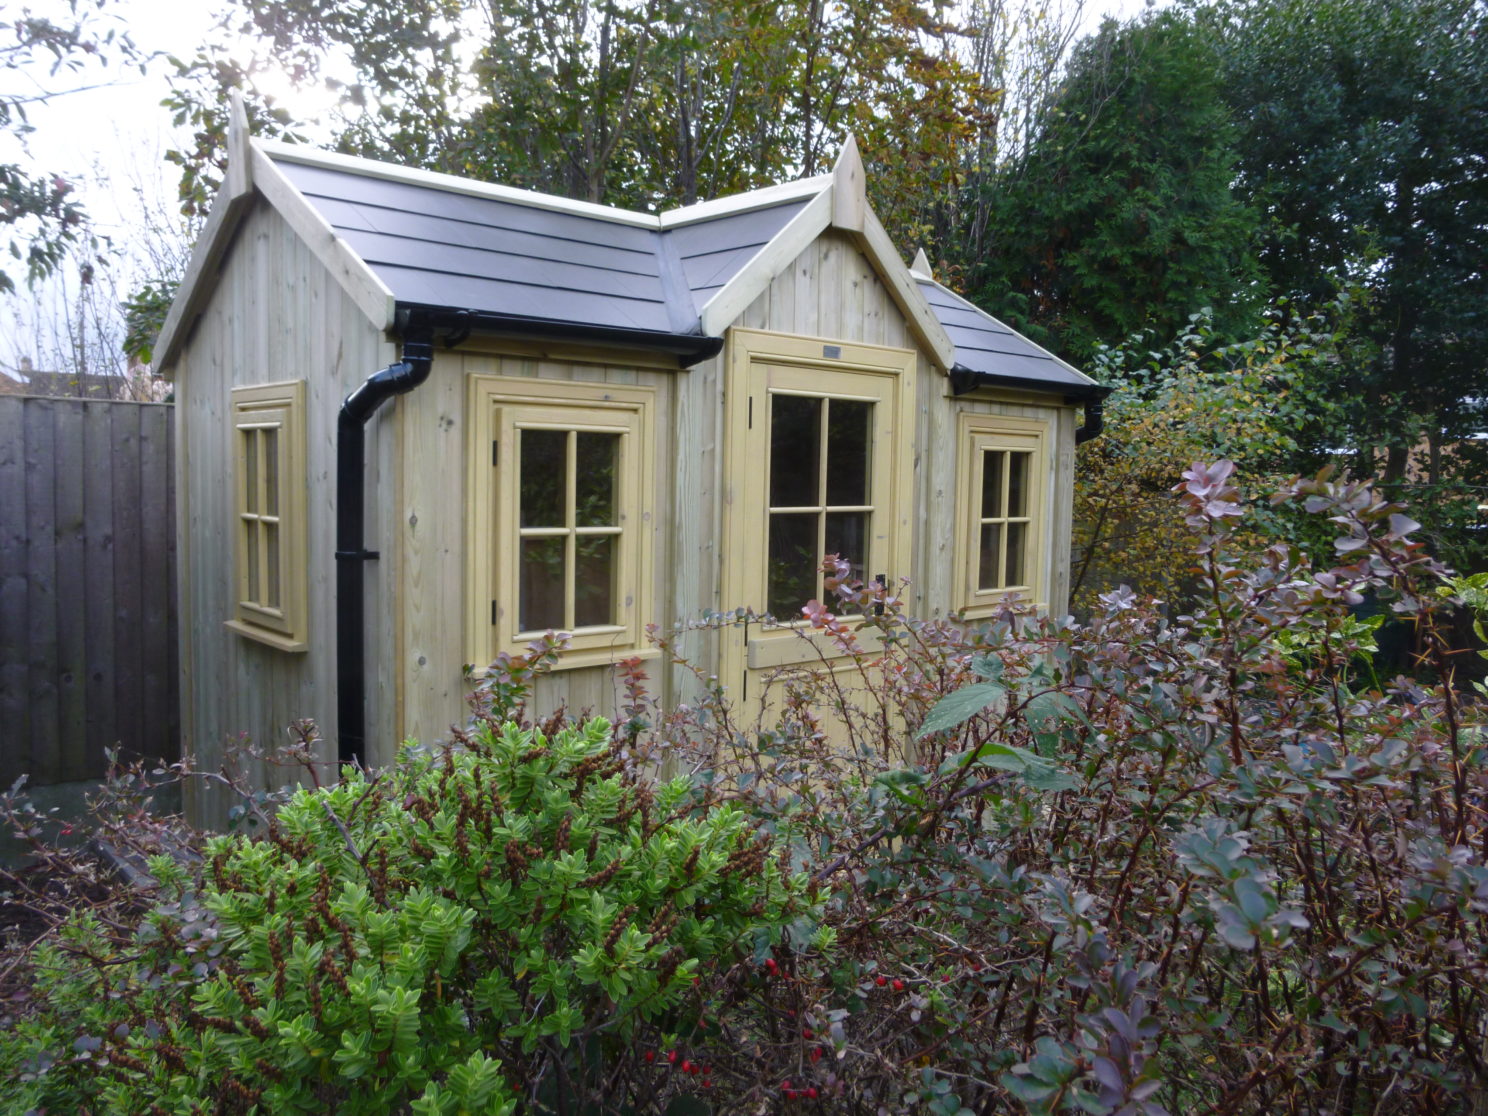 insulated working from home office garden building